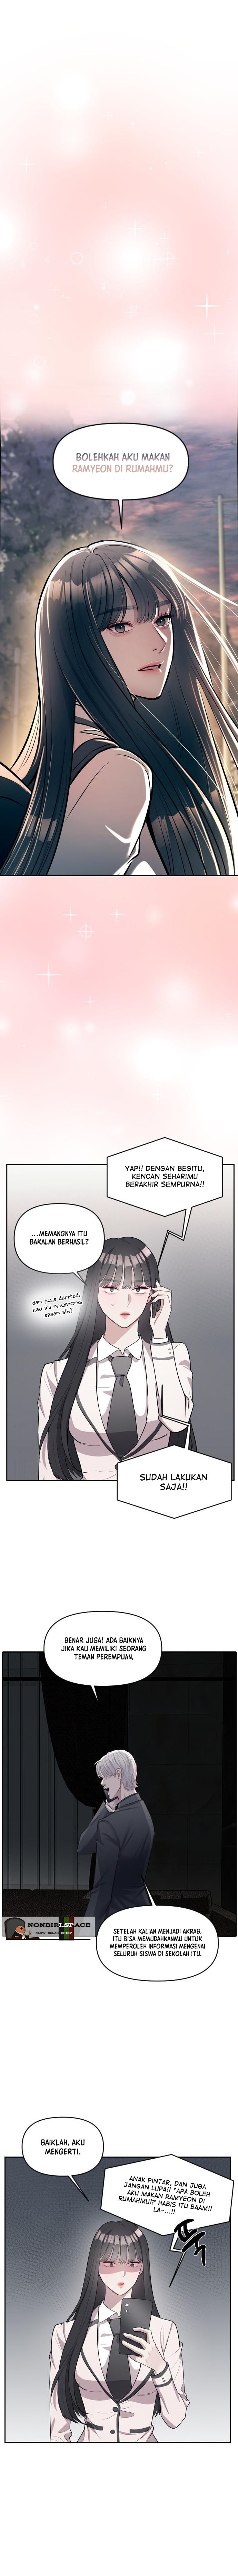 Undercover! Chaebol High School Chapter 02